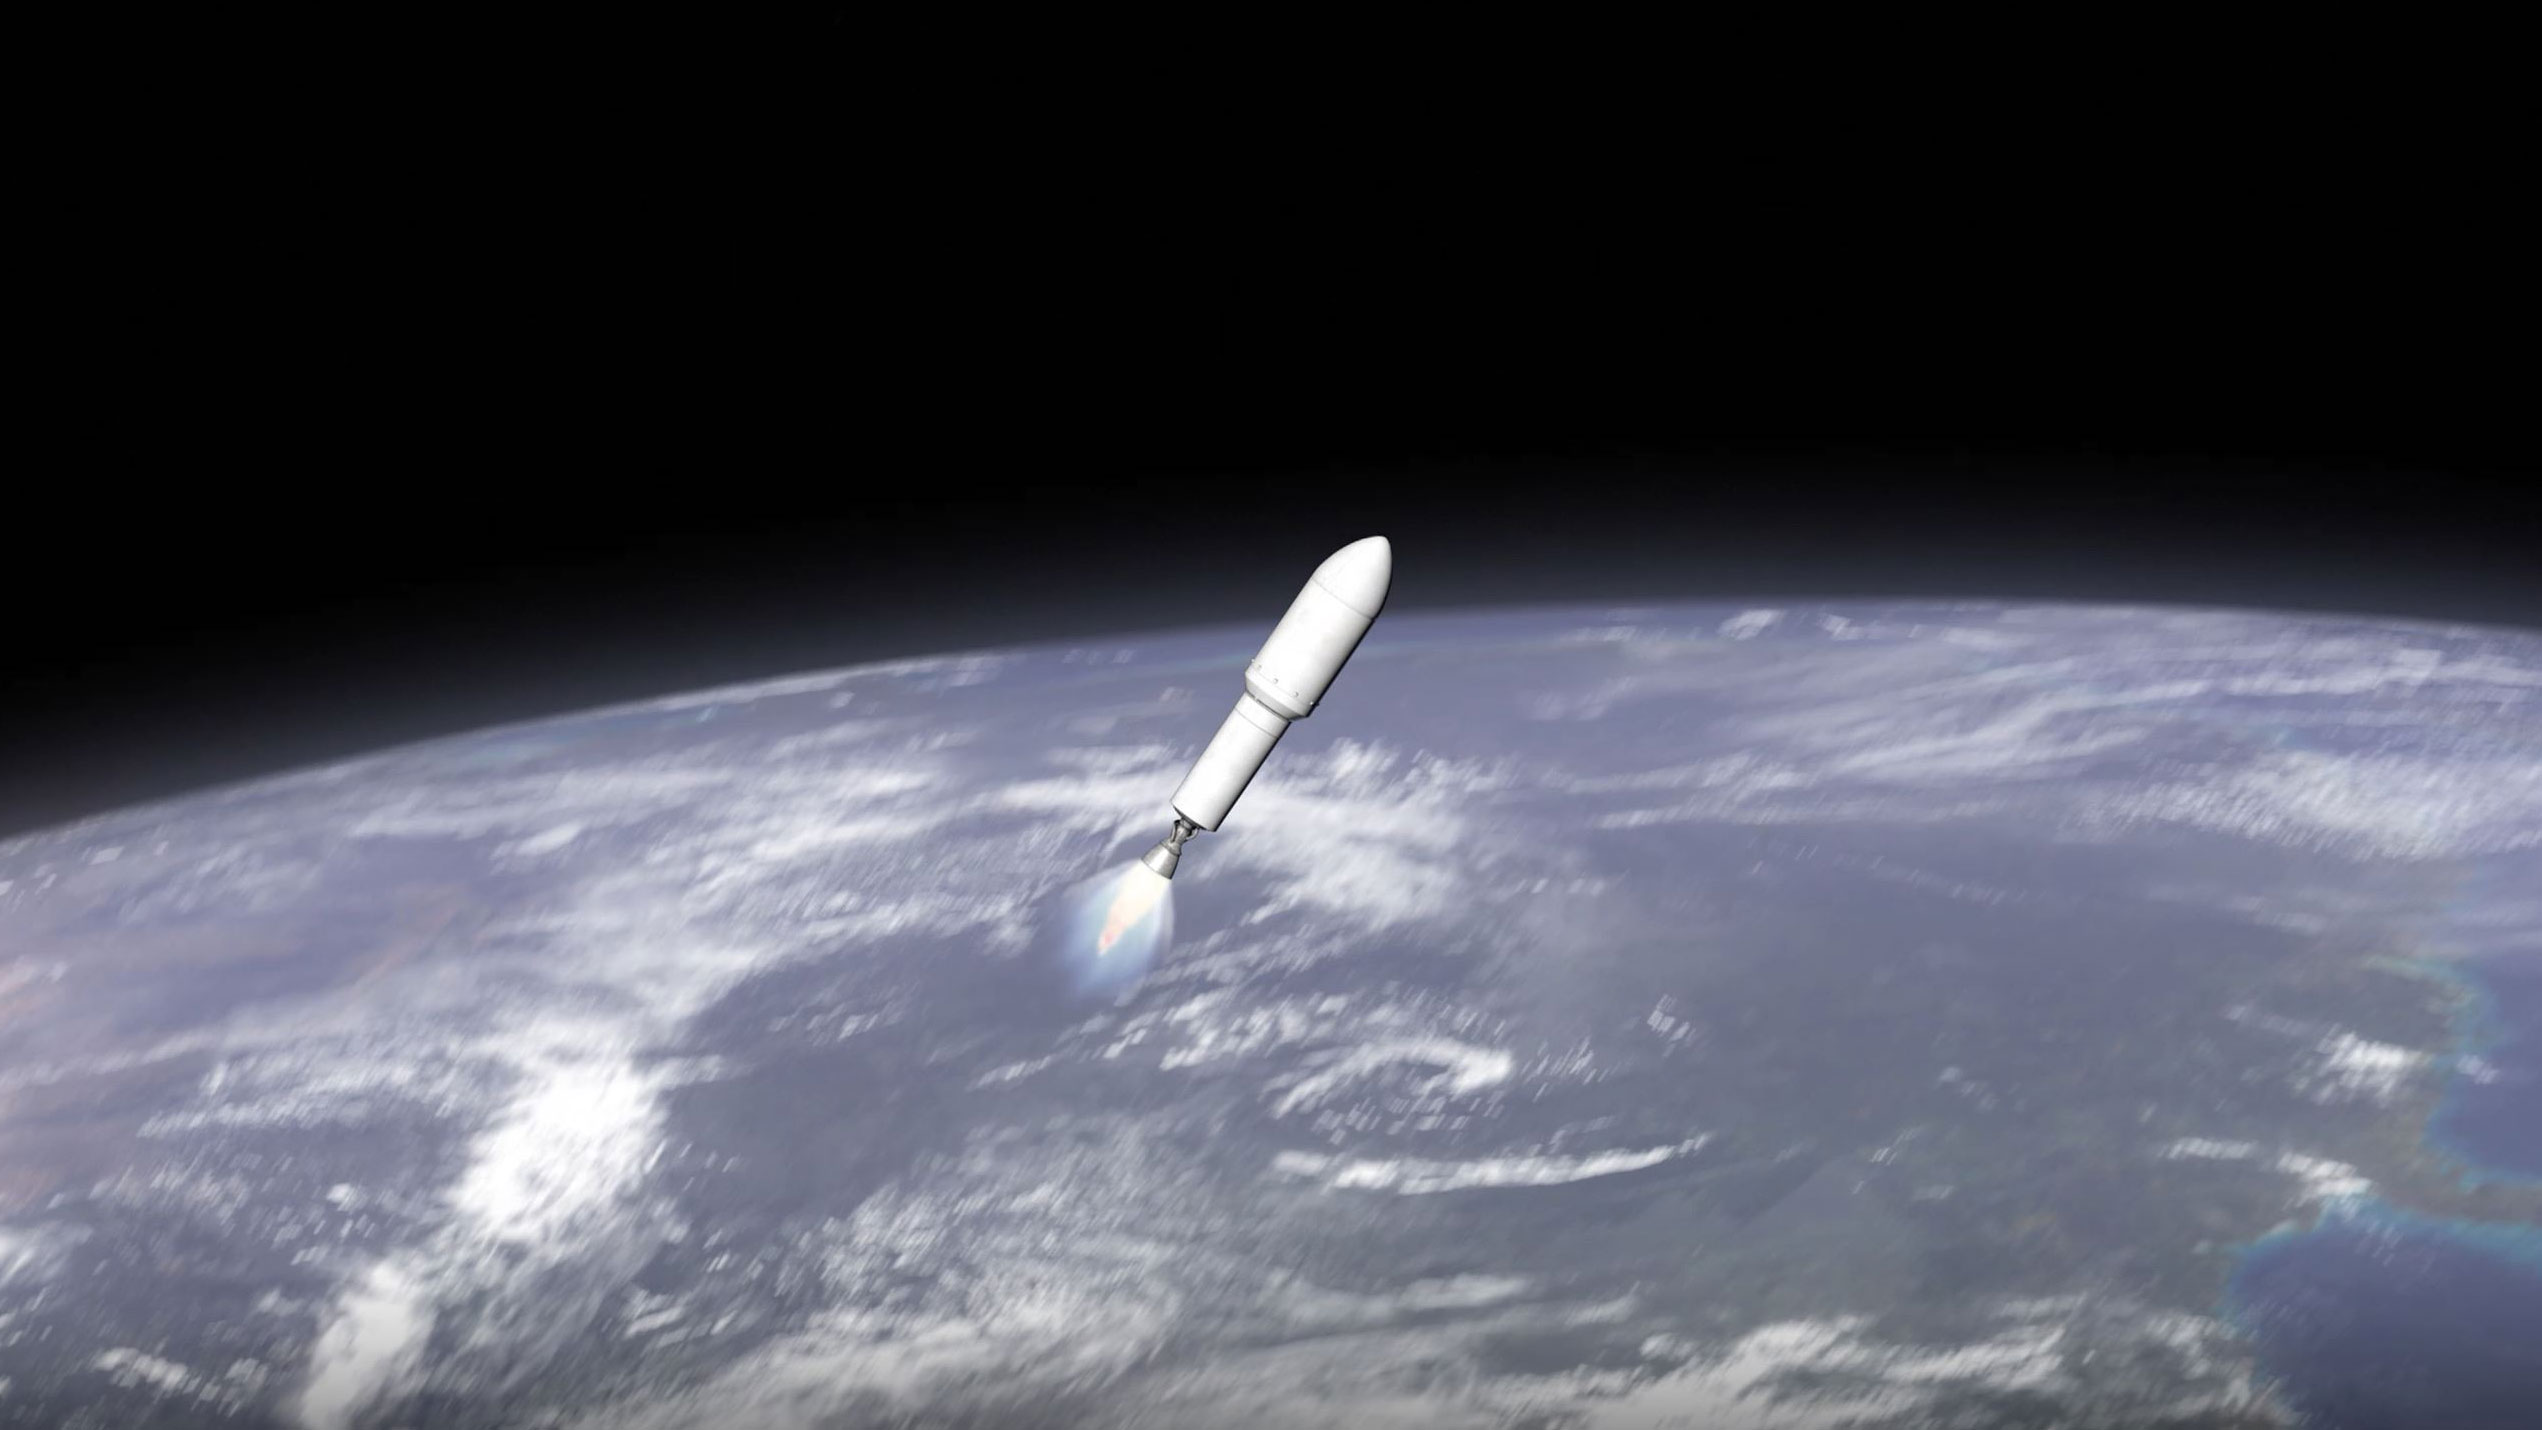 A screengrab from an animation showing Europa Clipper after launch.